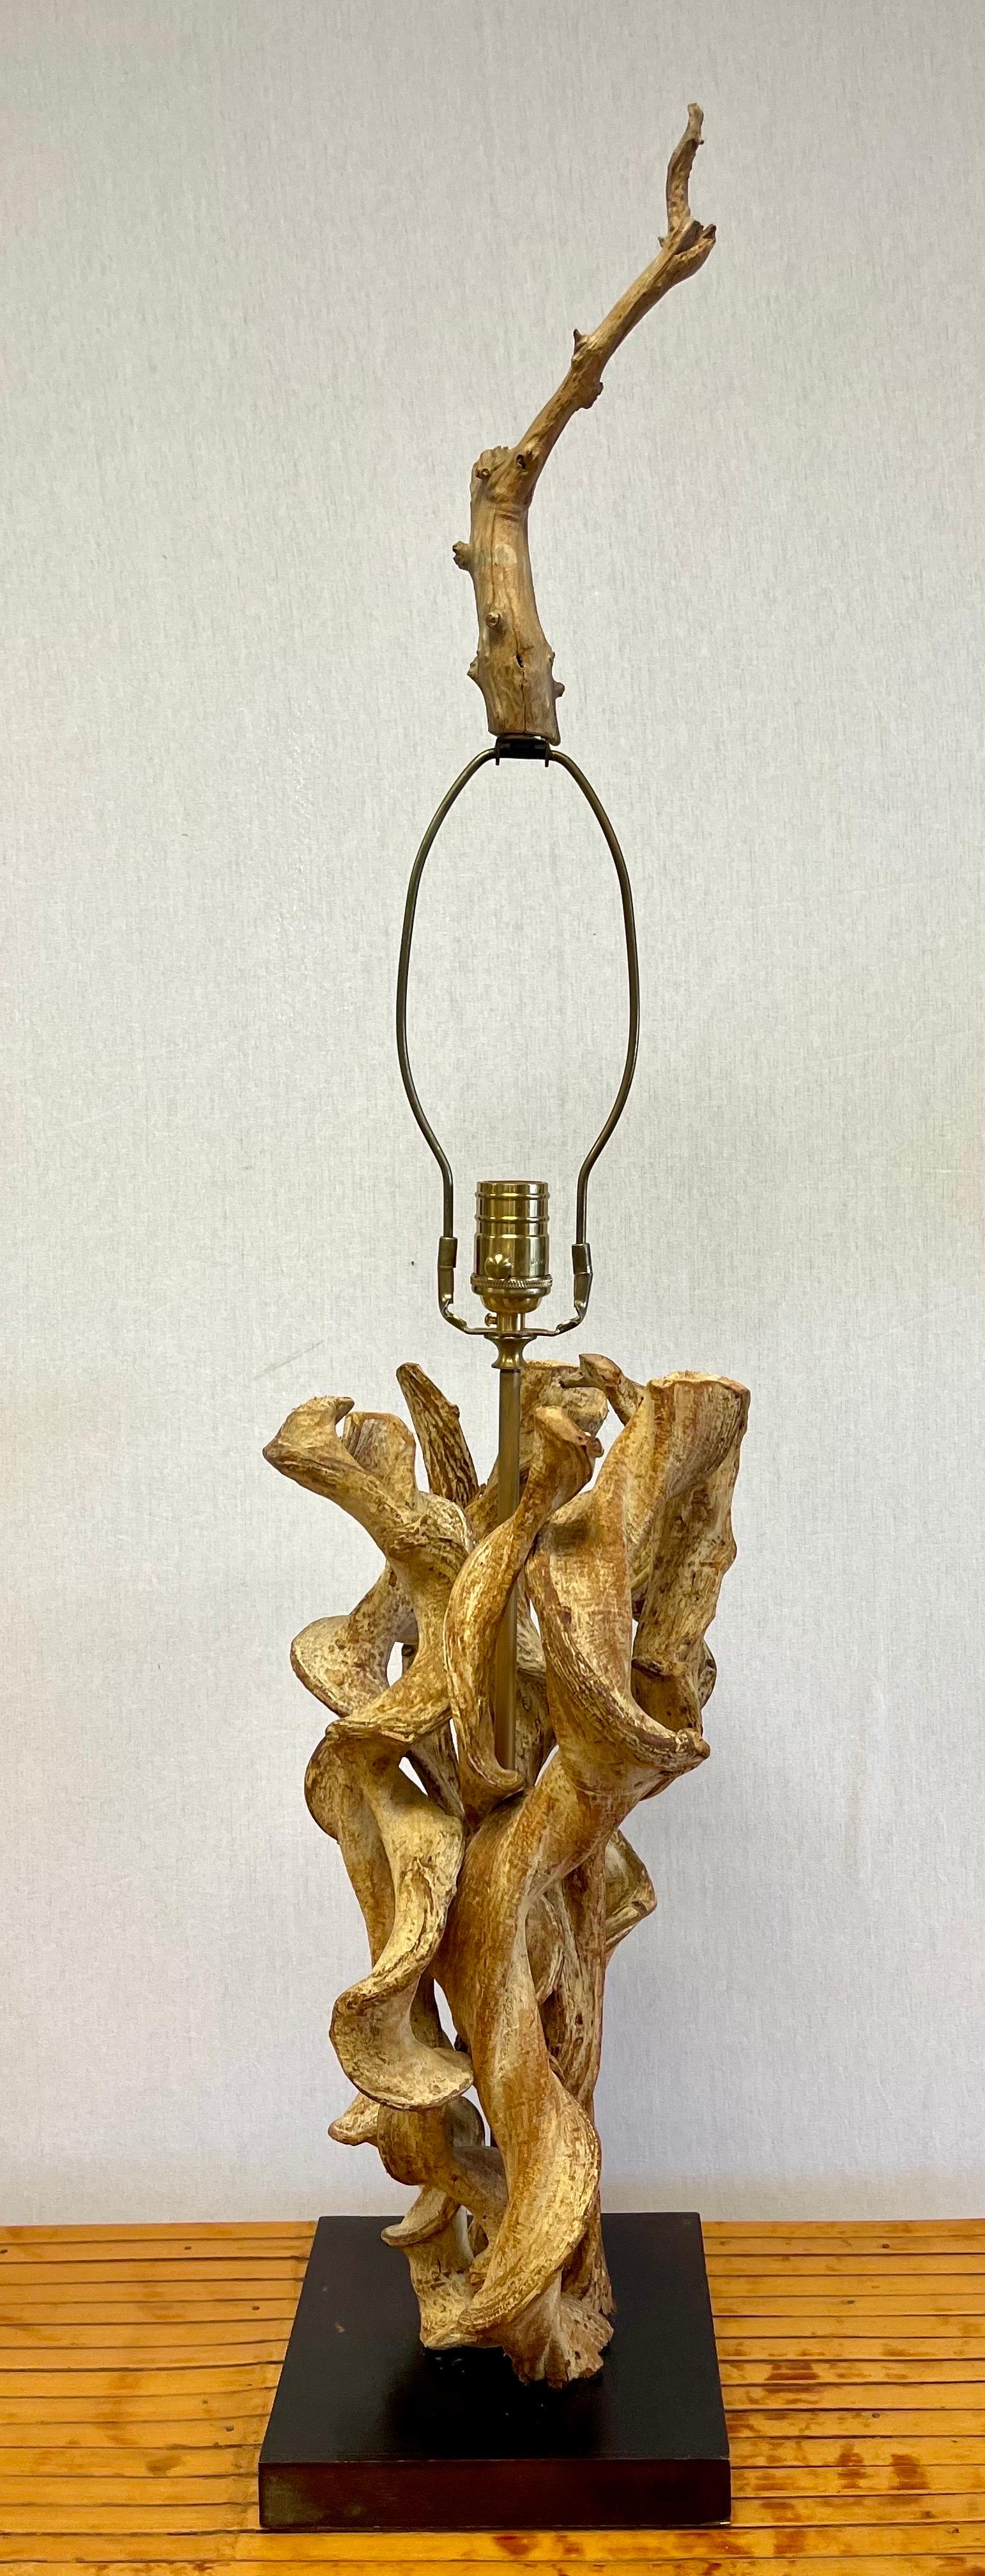 Vintage sculptural driftwood lamp made of intertwining branches and topped with matching finial. Mounted on a lacquered wood base.
19”H to top of socket.